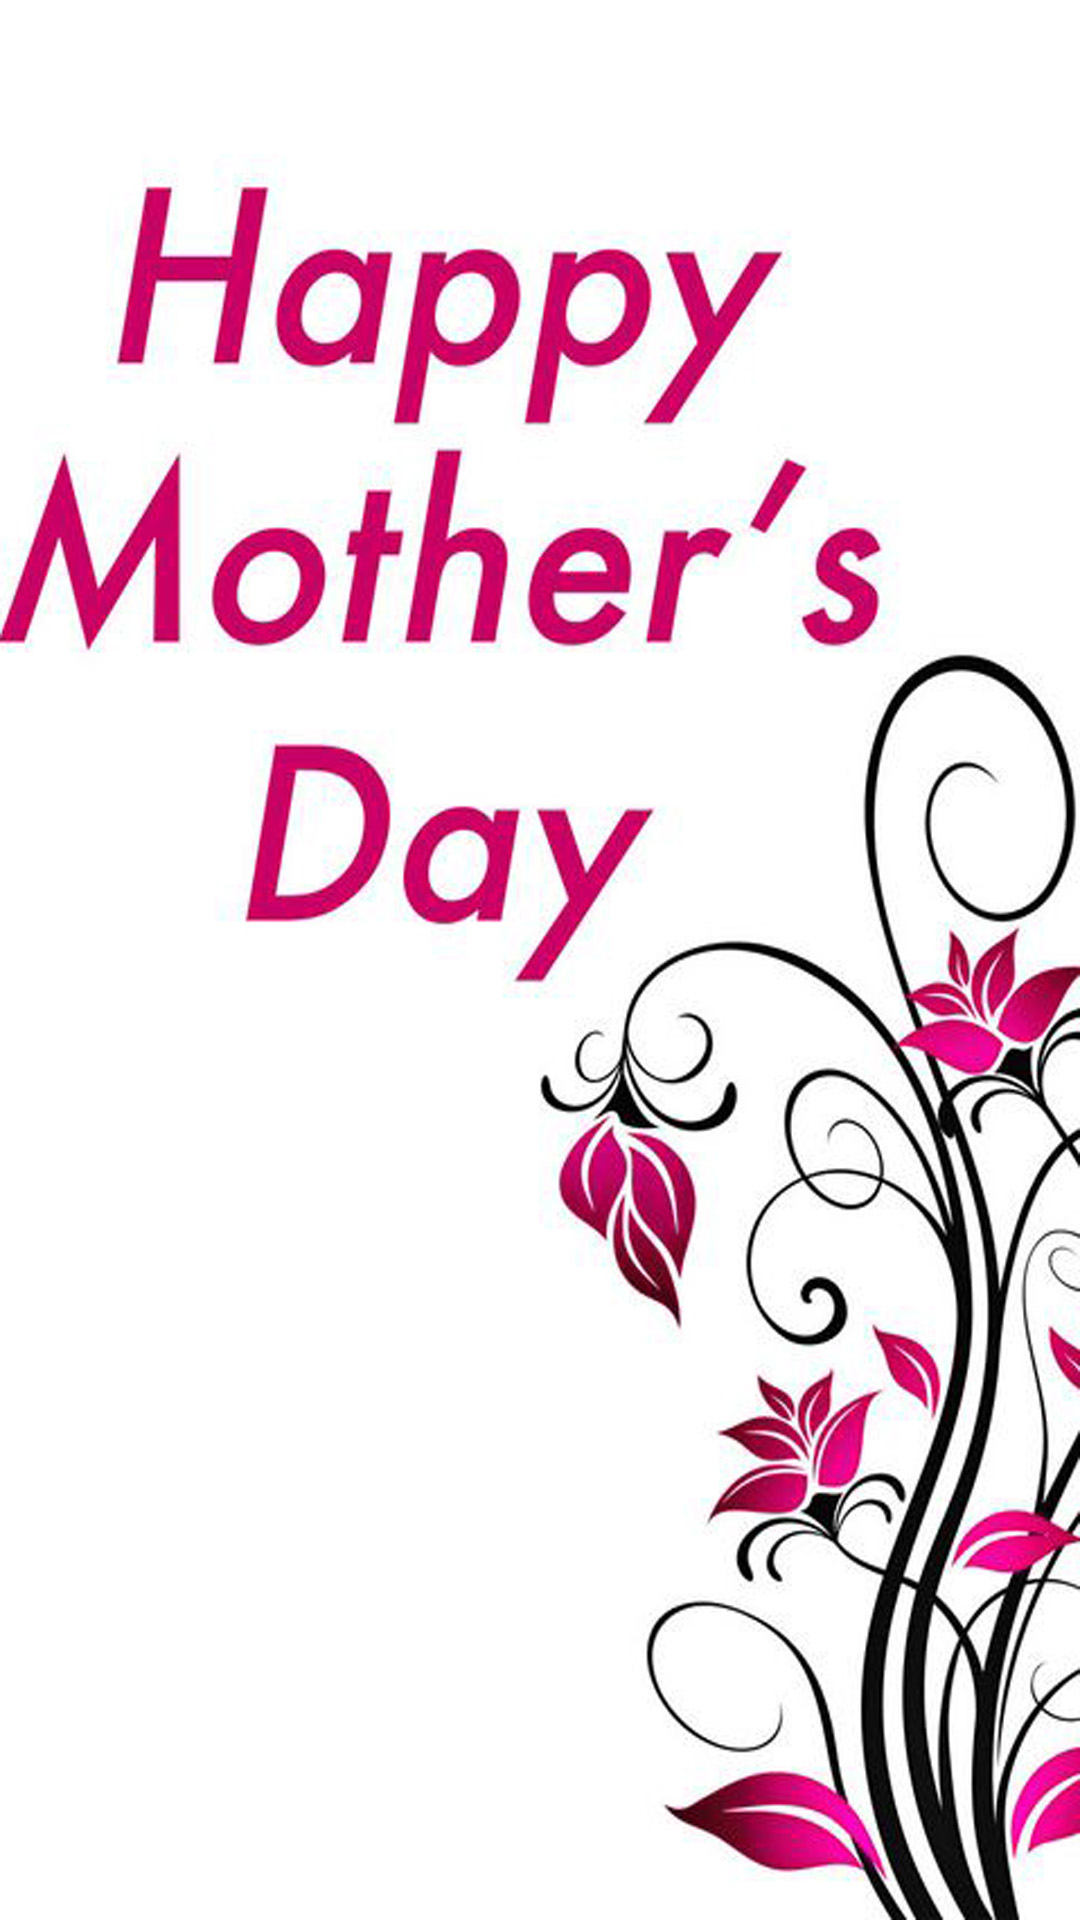 Mothes Day Greeting Card - Mother's Day 2019 Usa - HD Wallpaper 